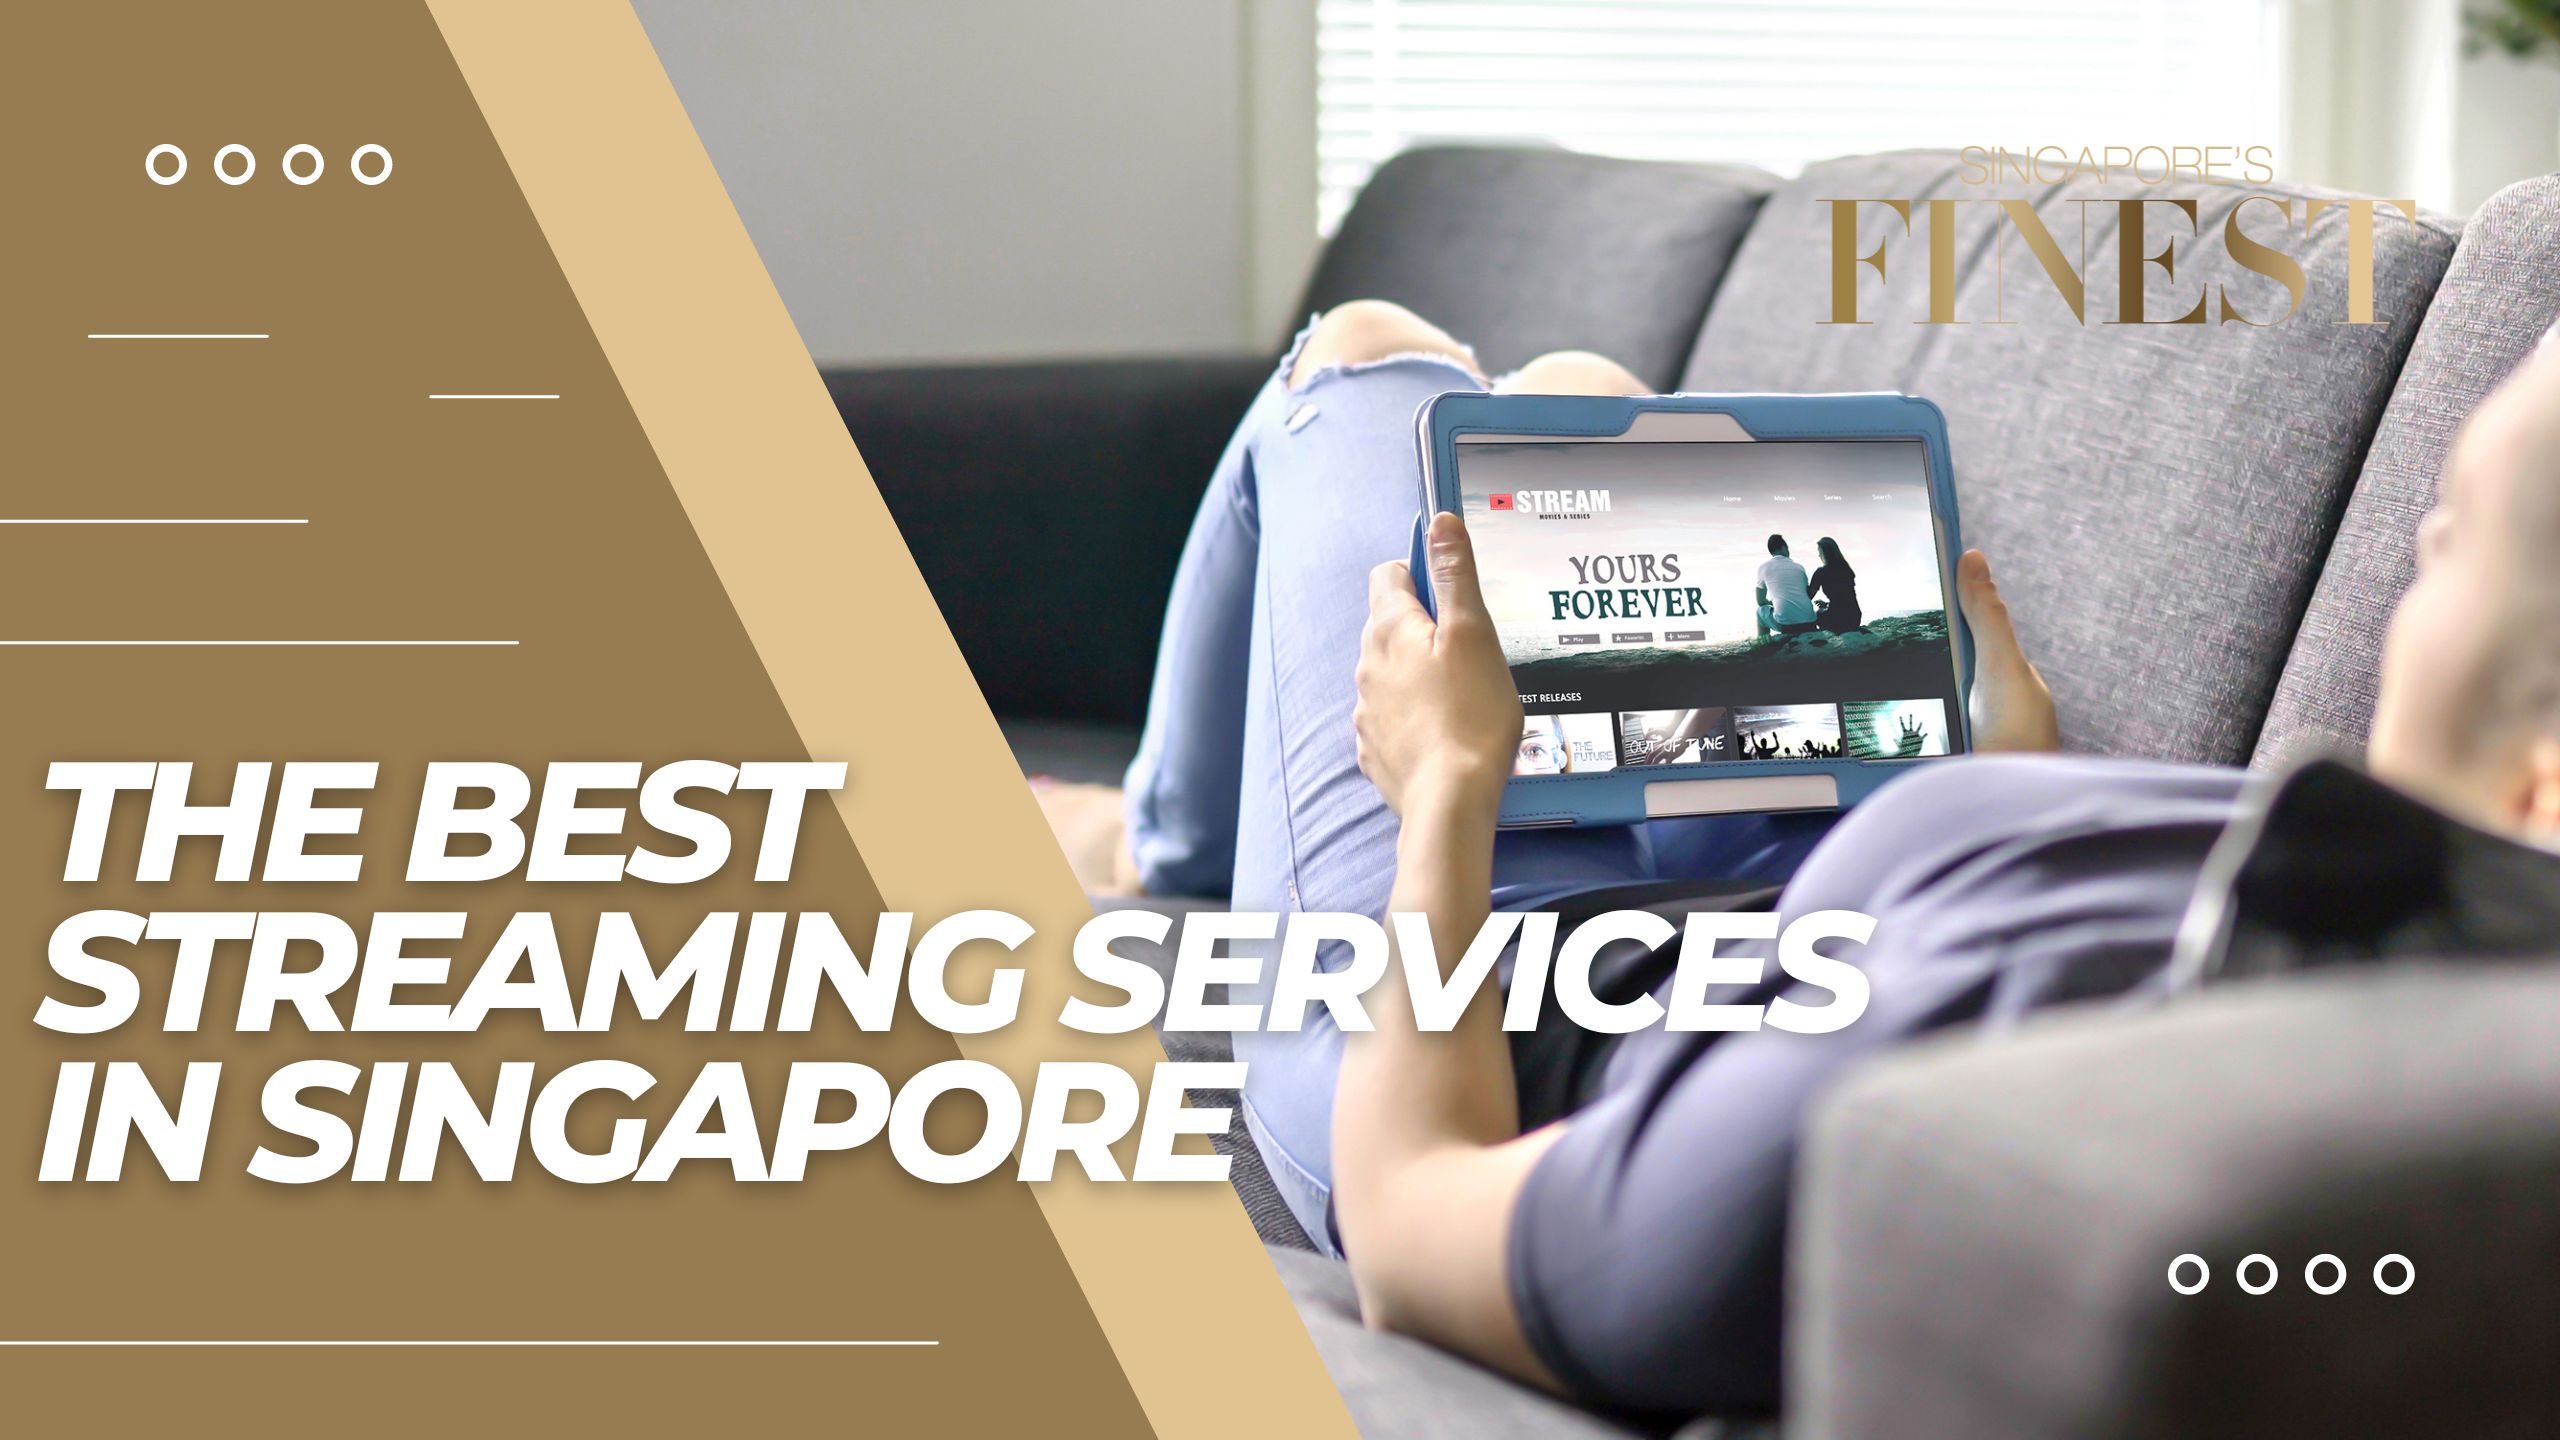 The Finest Streaming Services in Singapore